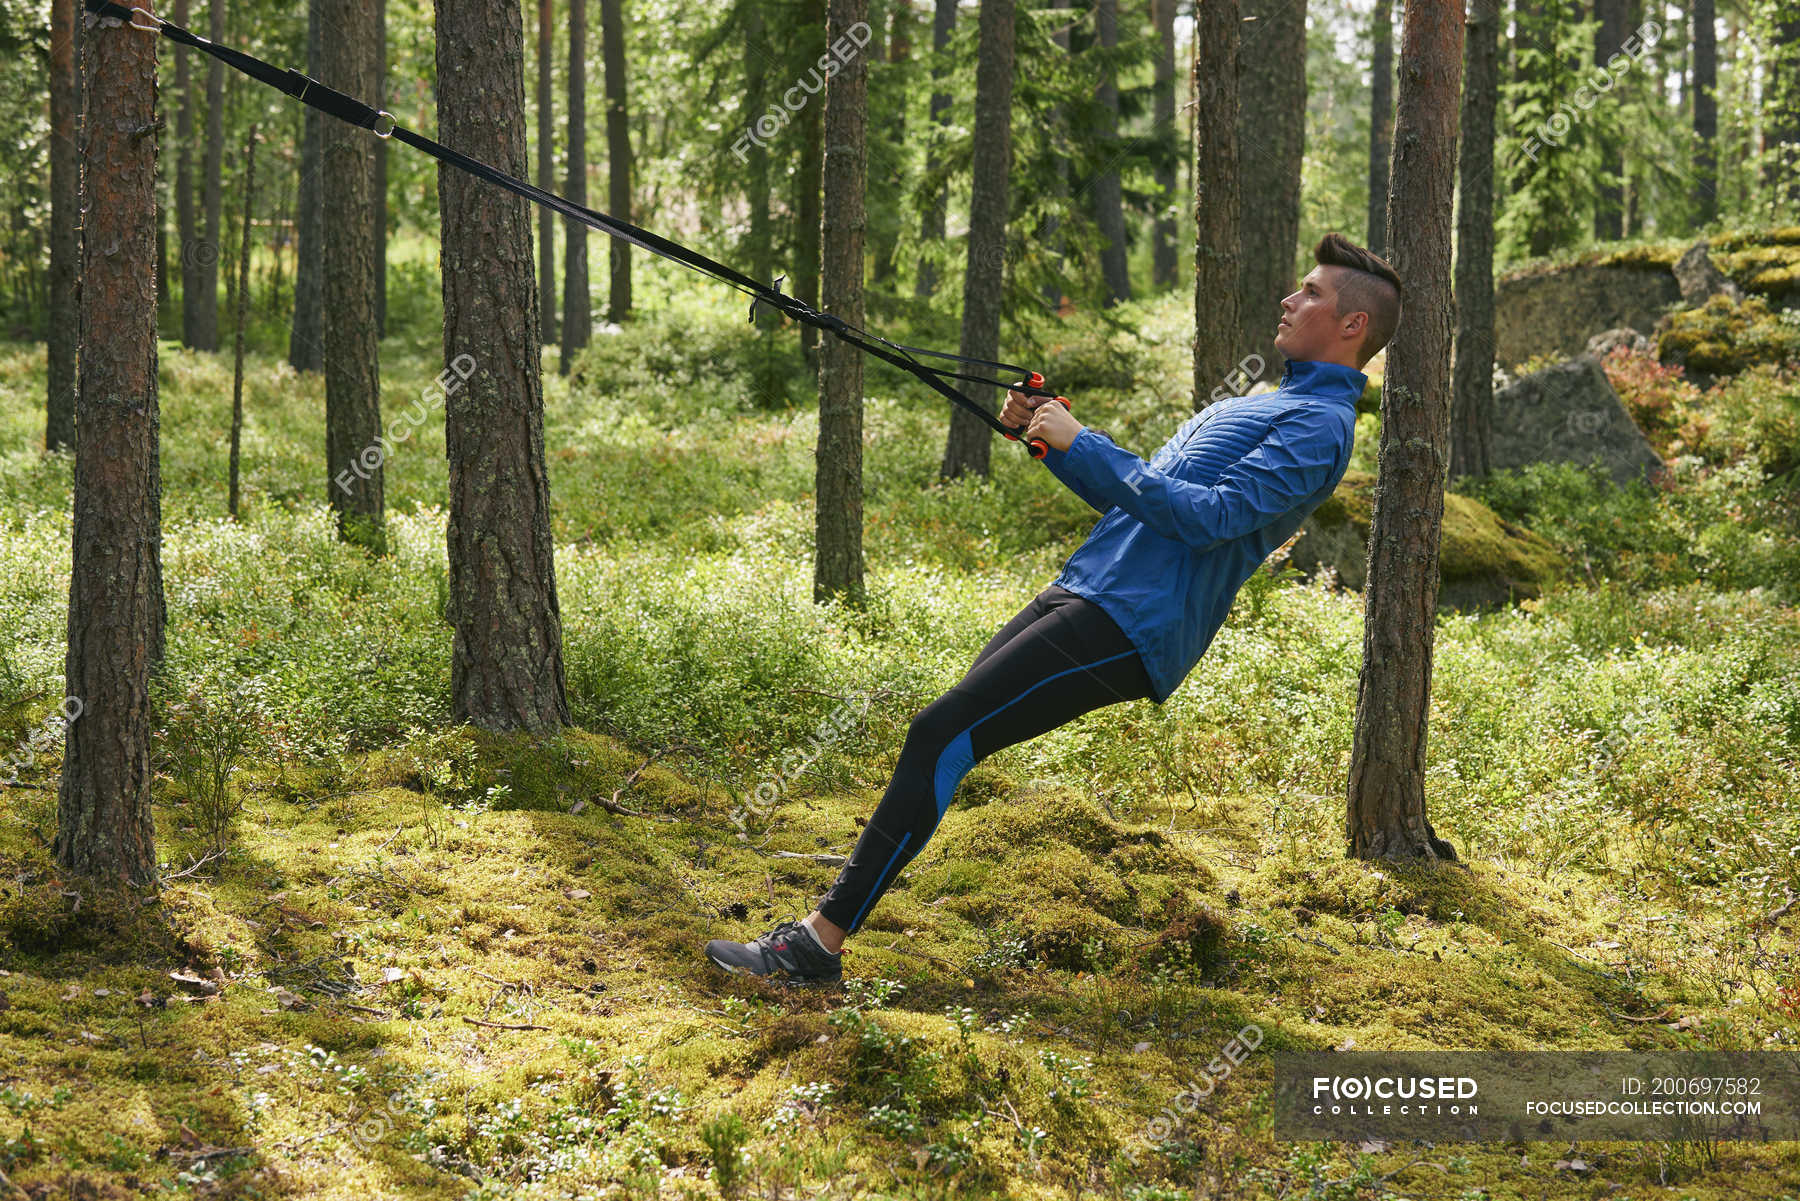 Runner using resistance band on tree in 